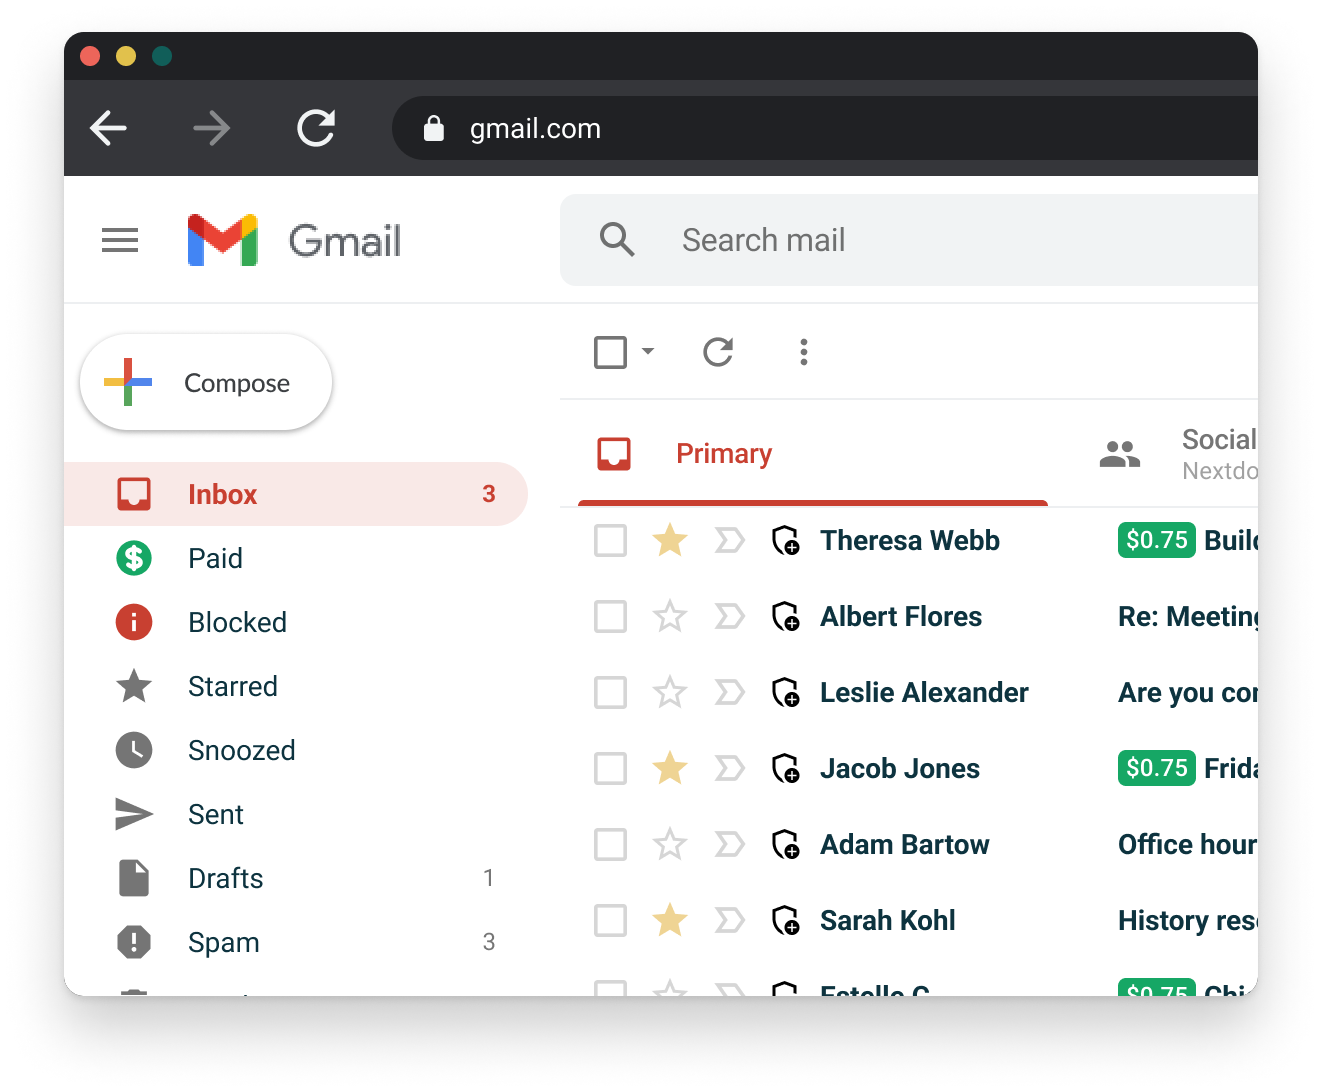 Gmail UI with MailWall modifications